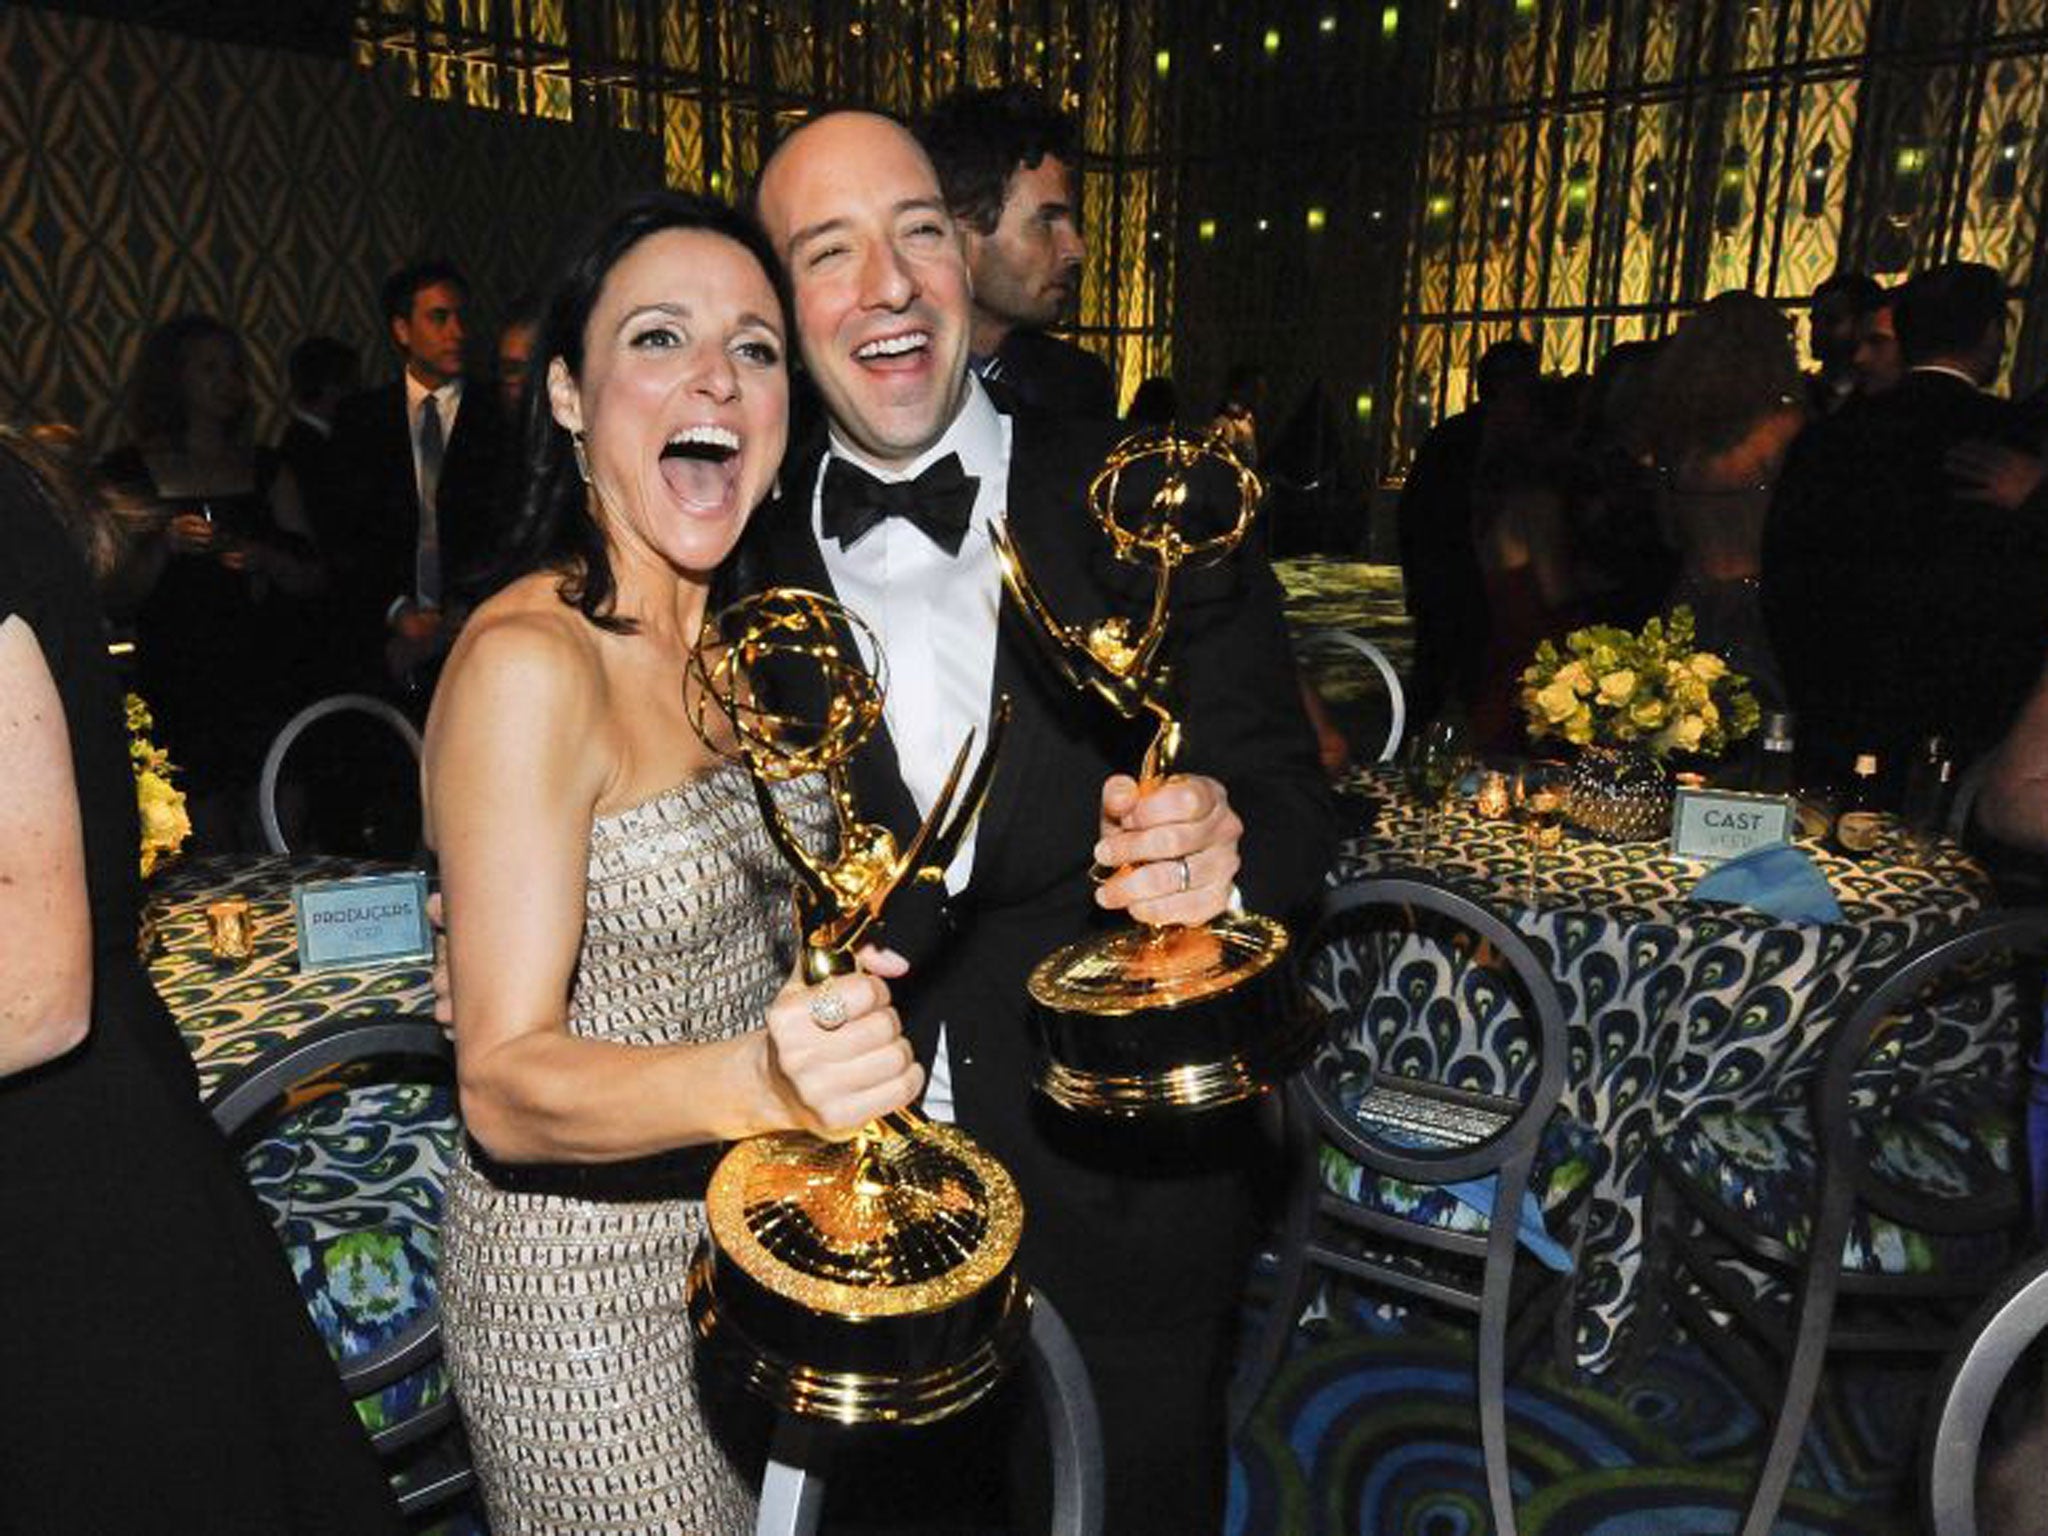 Julia Louis-Dreyfuss and Tony Hale celebrate their awards at the 65th Edition of the Emmys